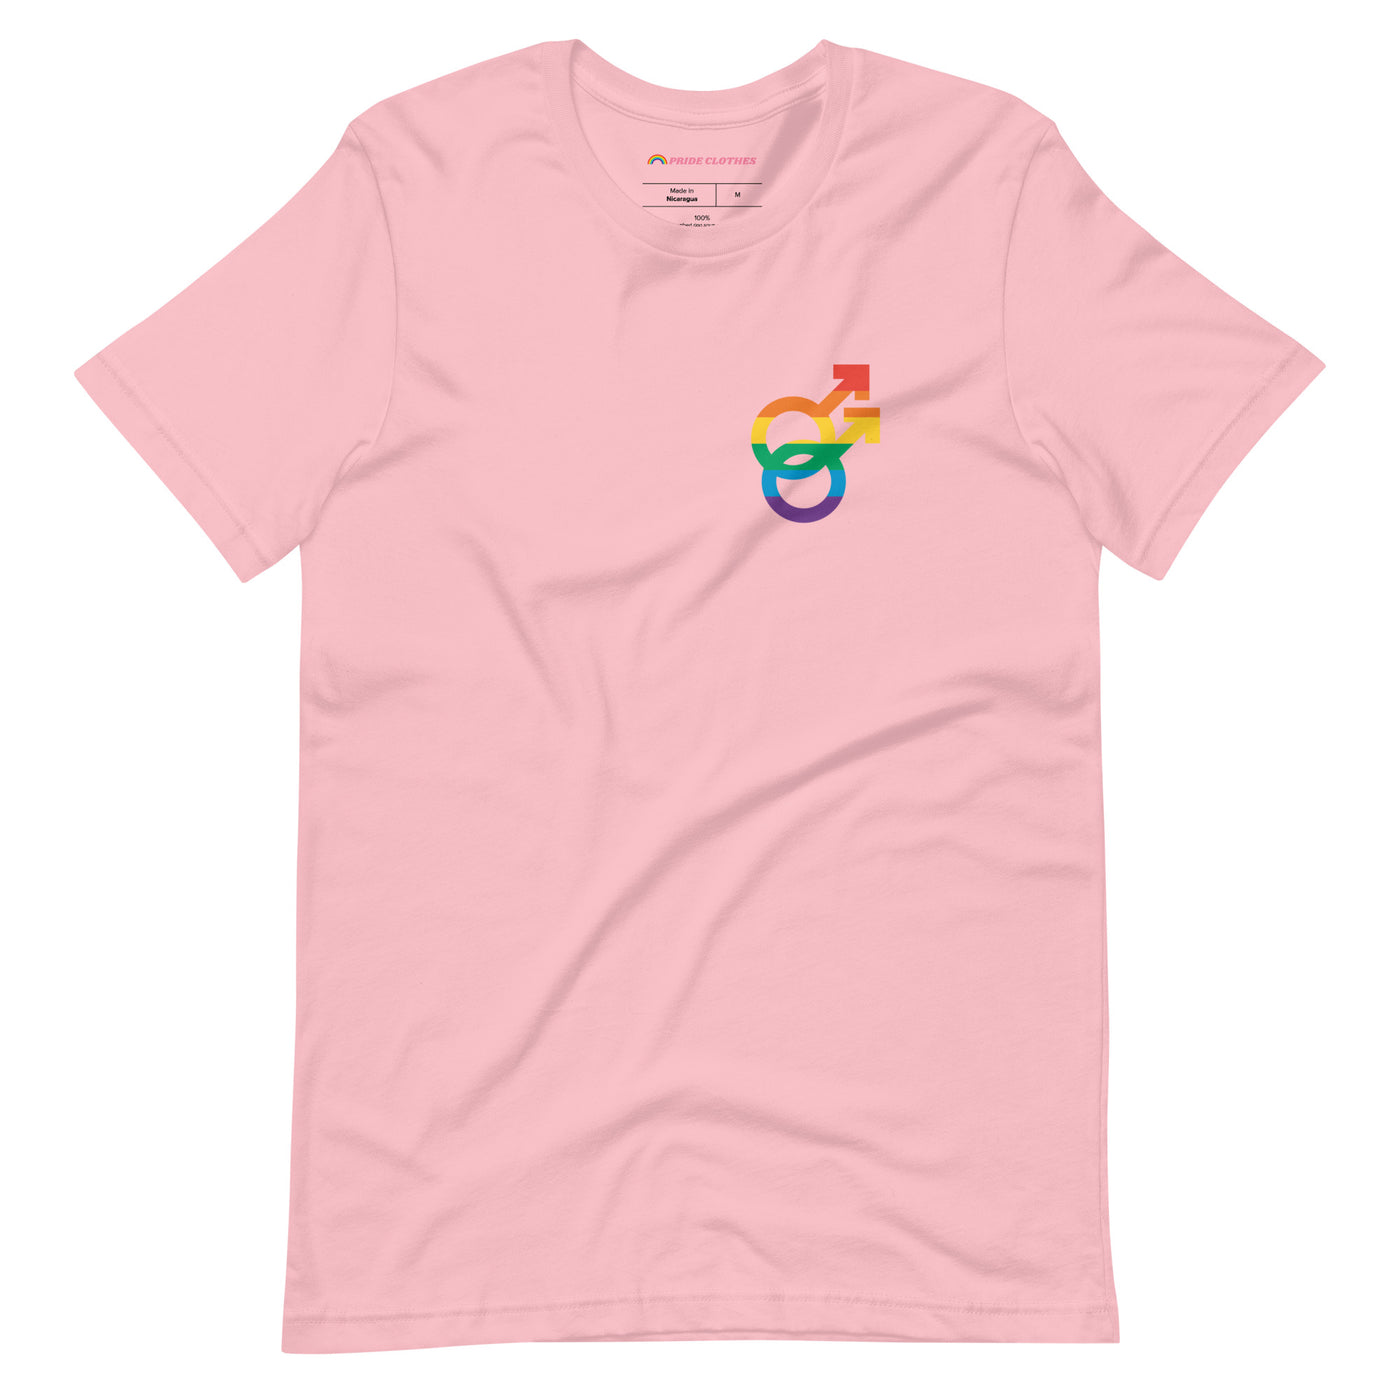 Pride Clothes - Fearlessly Express Your Truth Gay Gender Pride T-Shirt - Pink